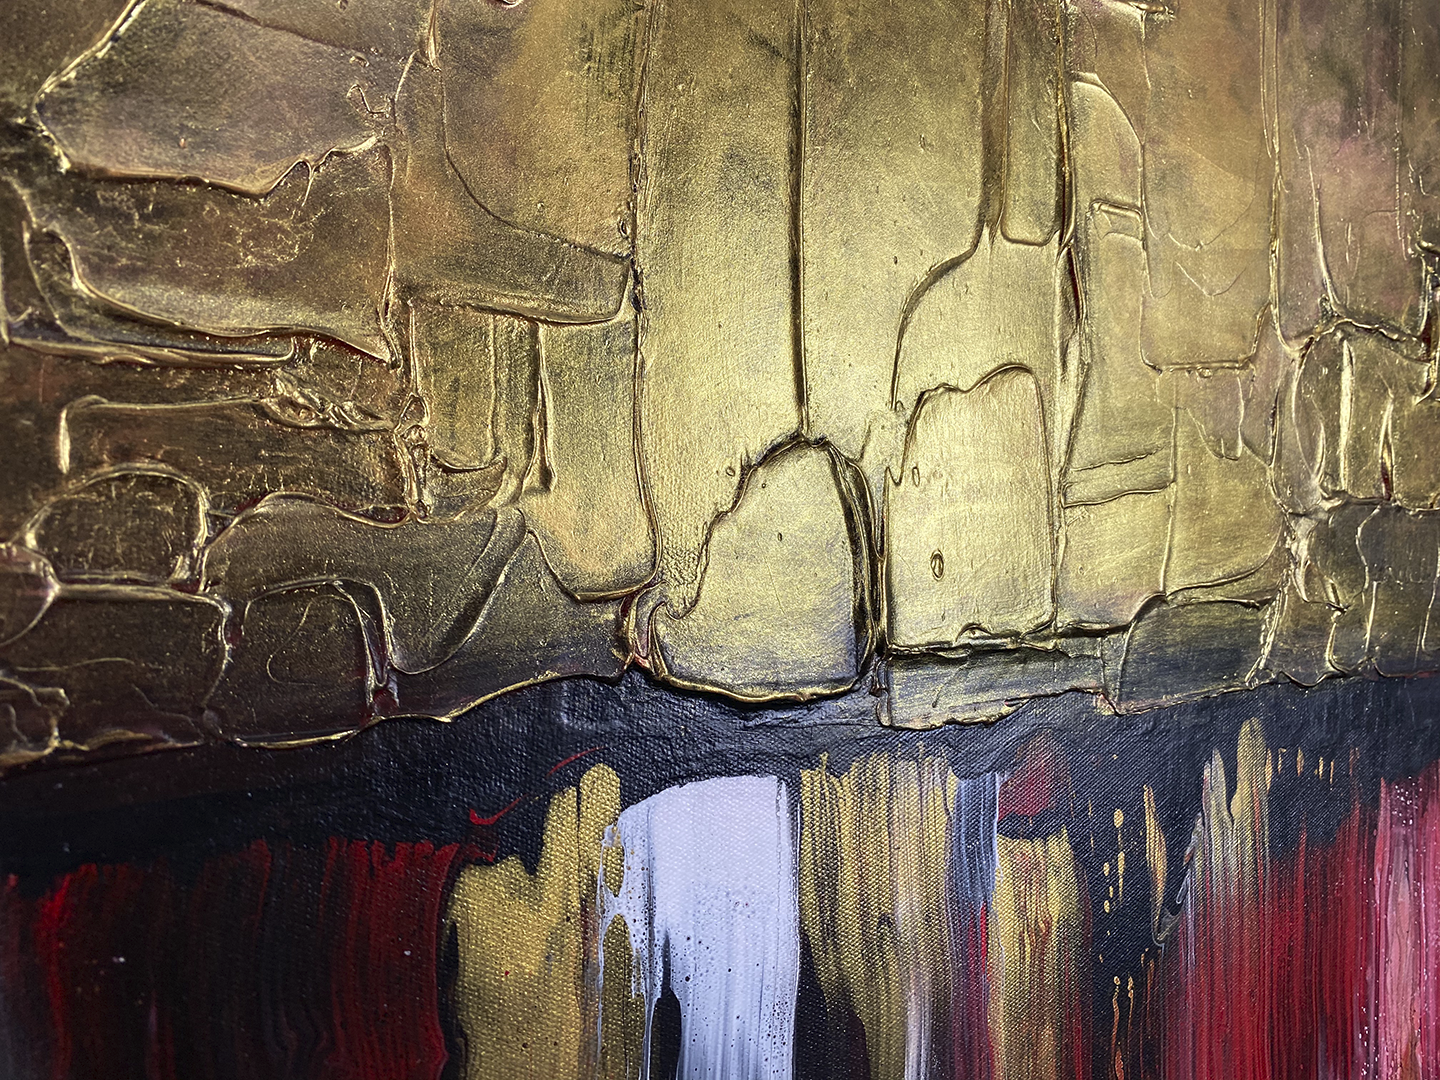 Abstract, acrylic and mixed-media painting showing a close-up of the texture paste and gold foil  And the black, red, white and gold acrylic paint